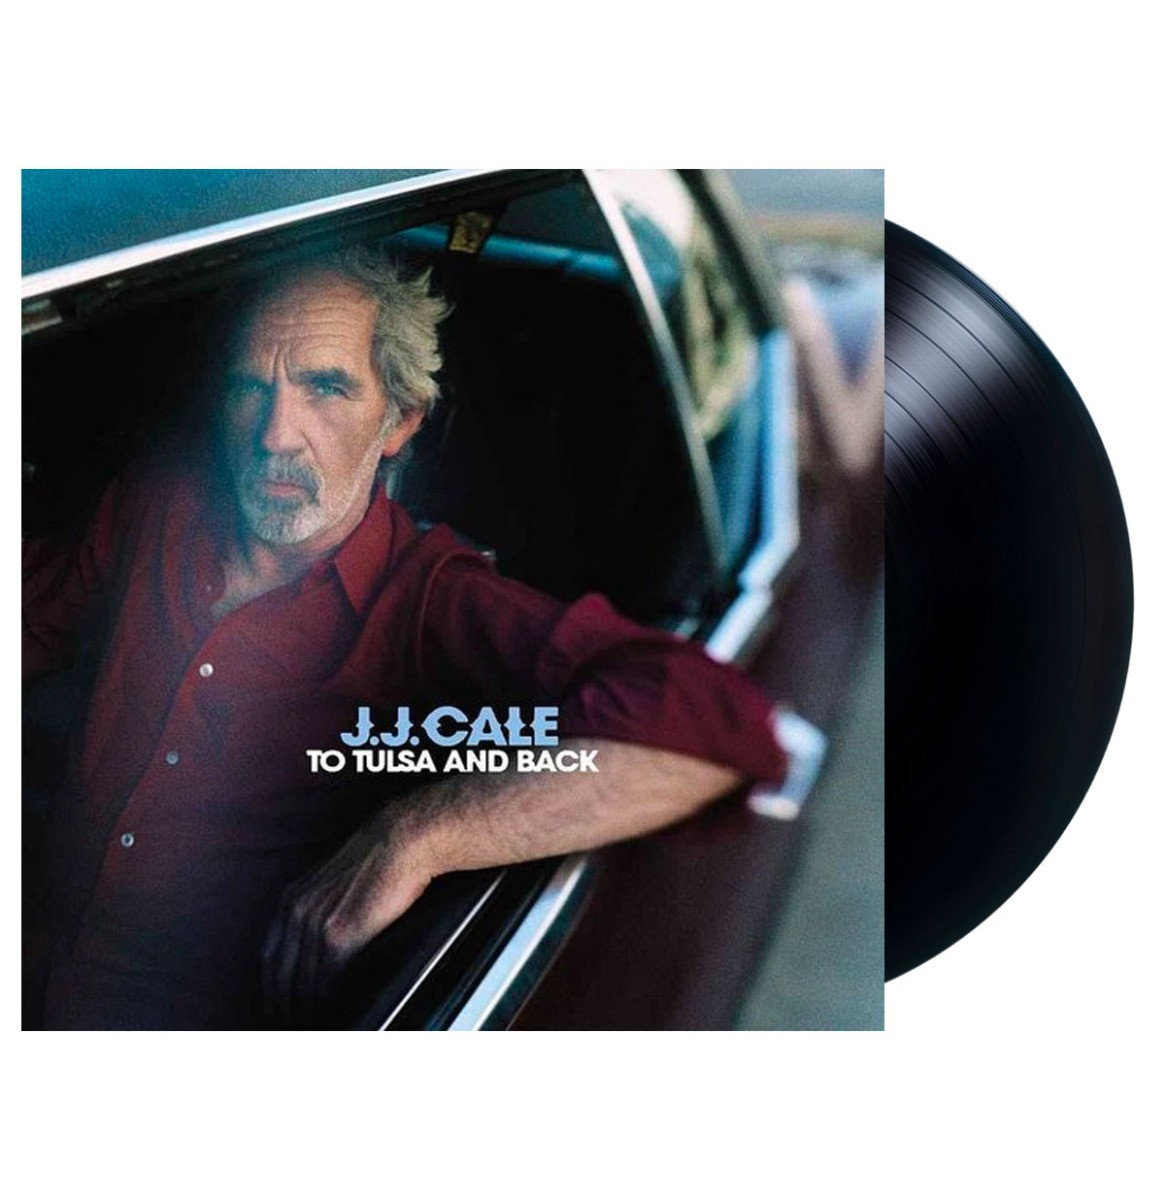 J.J. Cale - To Tulsa And Back 2LP + CD